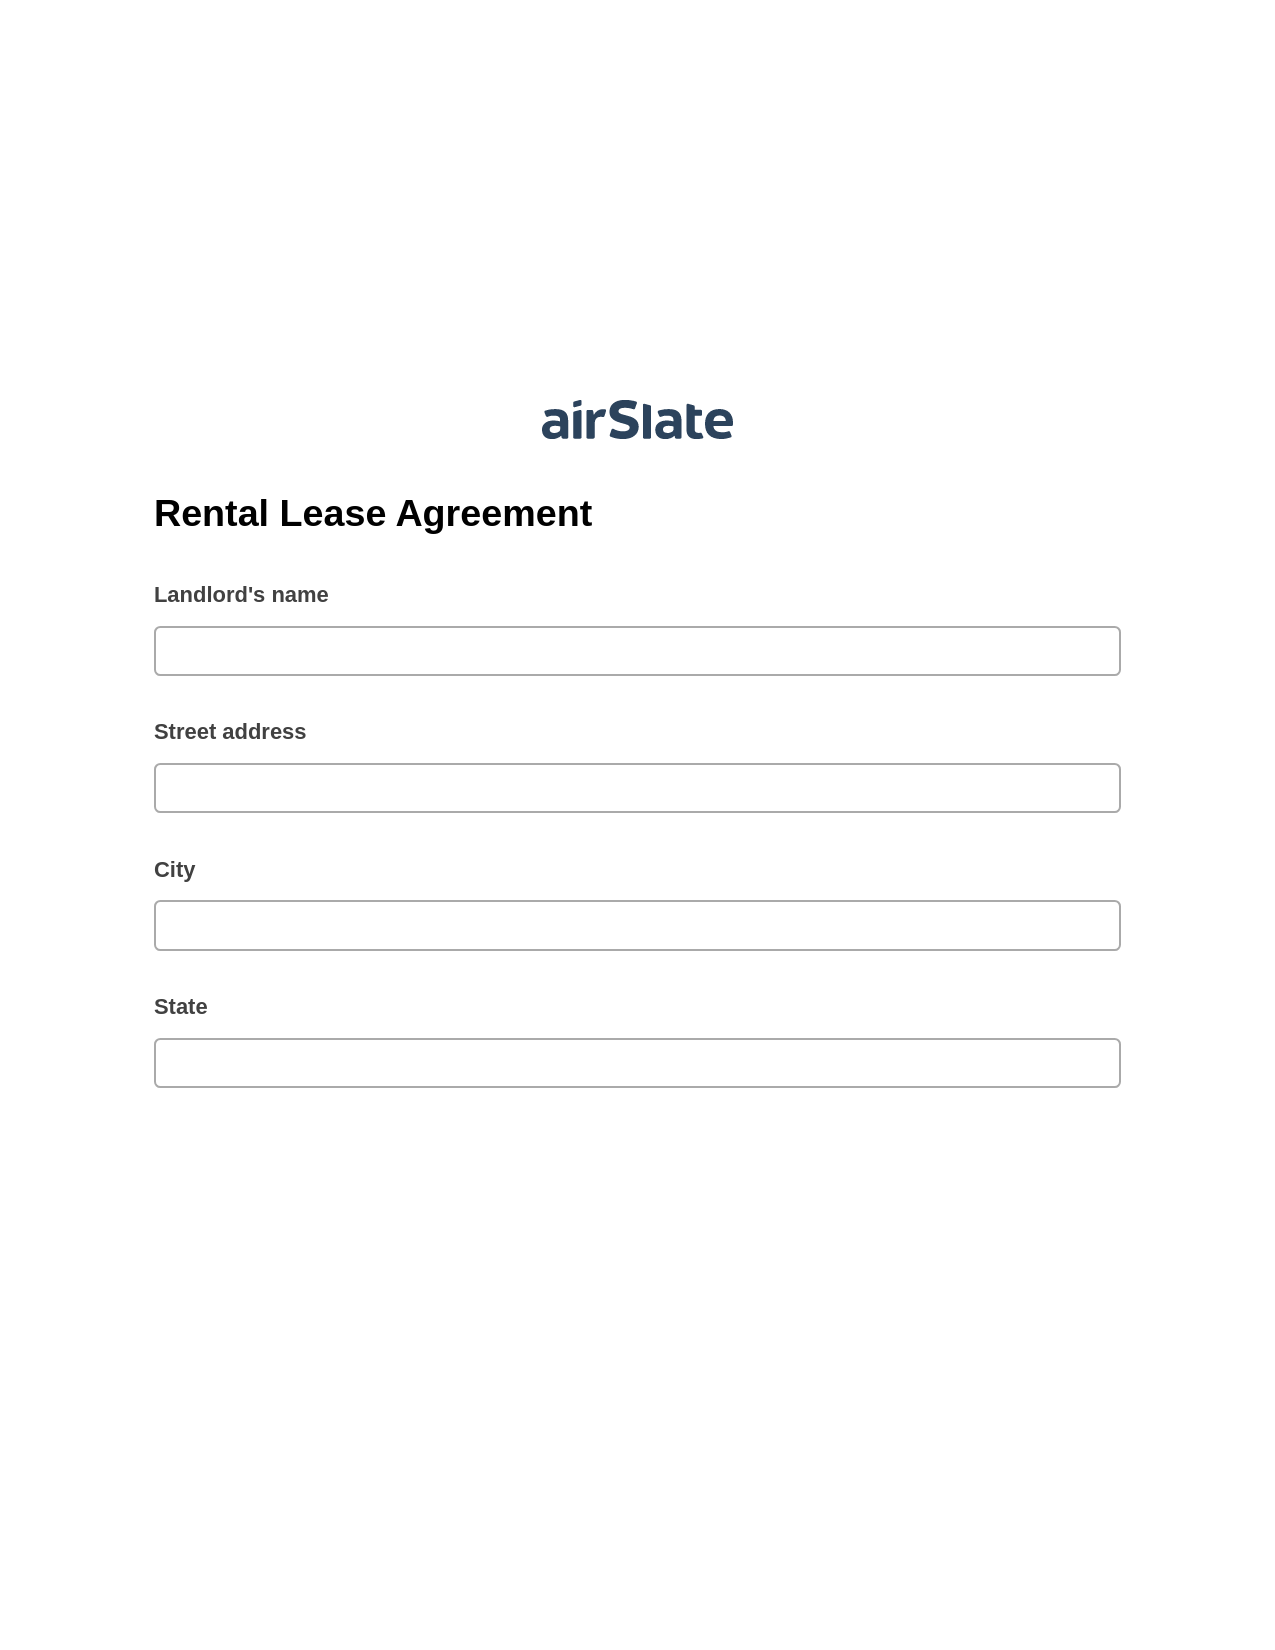 Rental Lease Agreement Pre-fill from Excel Spreadsheet Dropdown Options Bot, Create Slate every Google Sheet Update Bot, Dropbox Bot